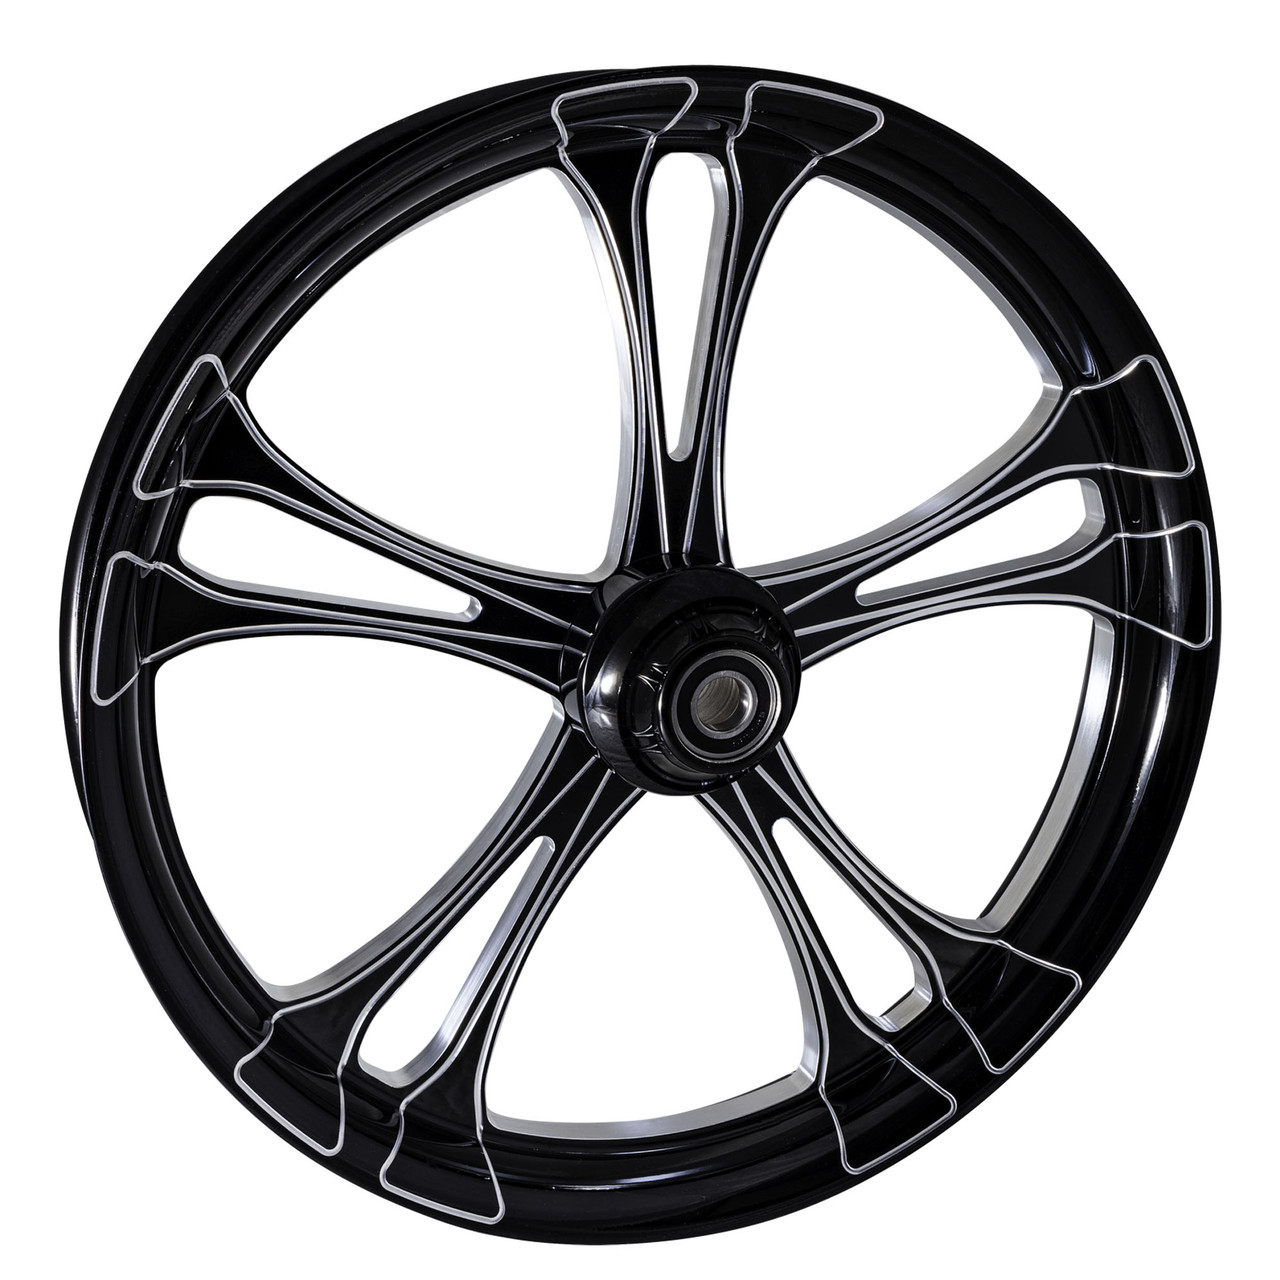 Cyber Cycle Parts Indian Challenger Black Contrast Wheels - Maverick